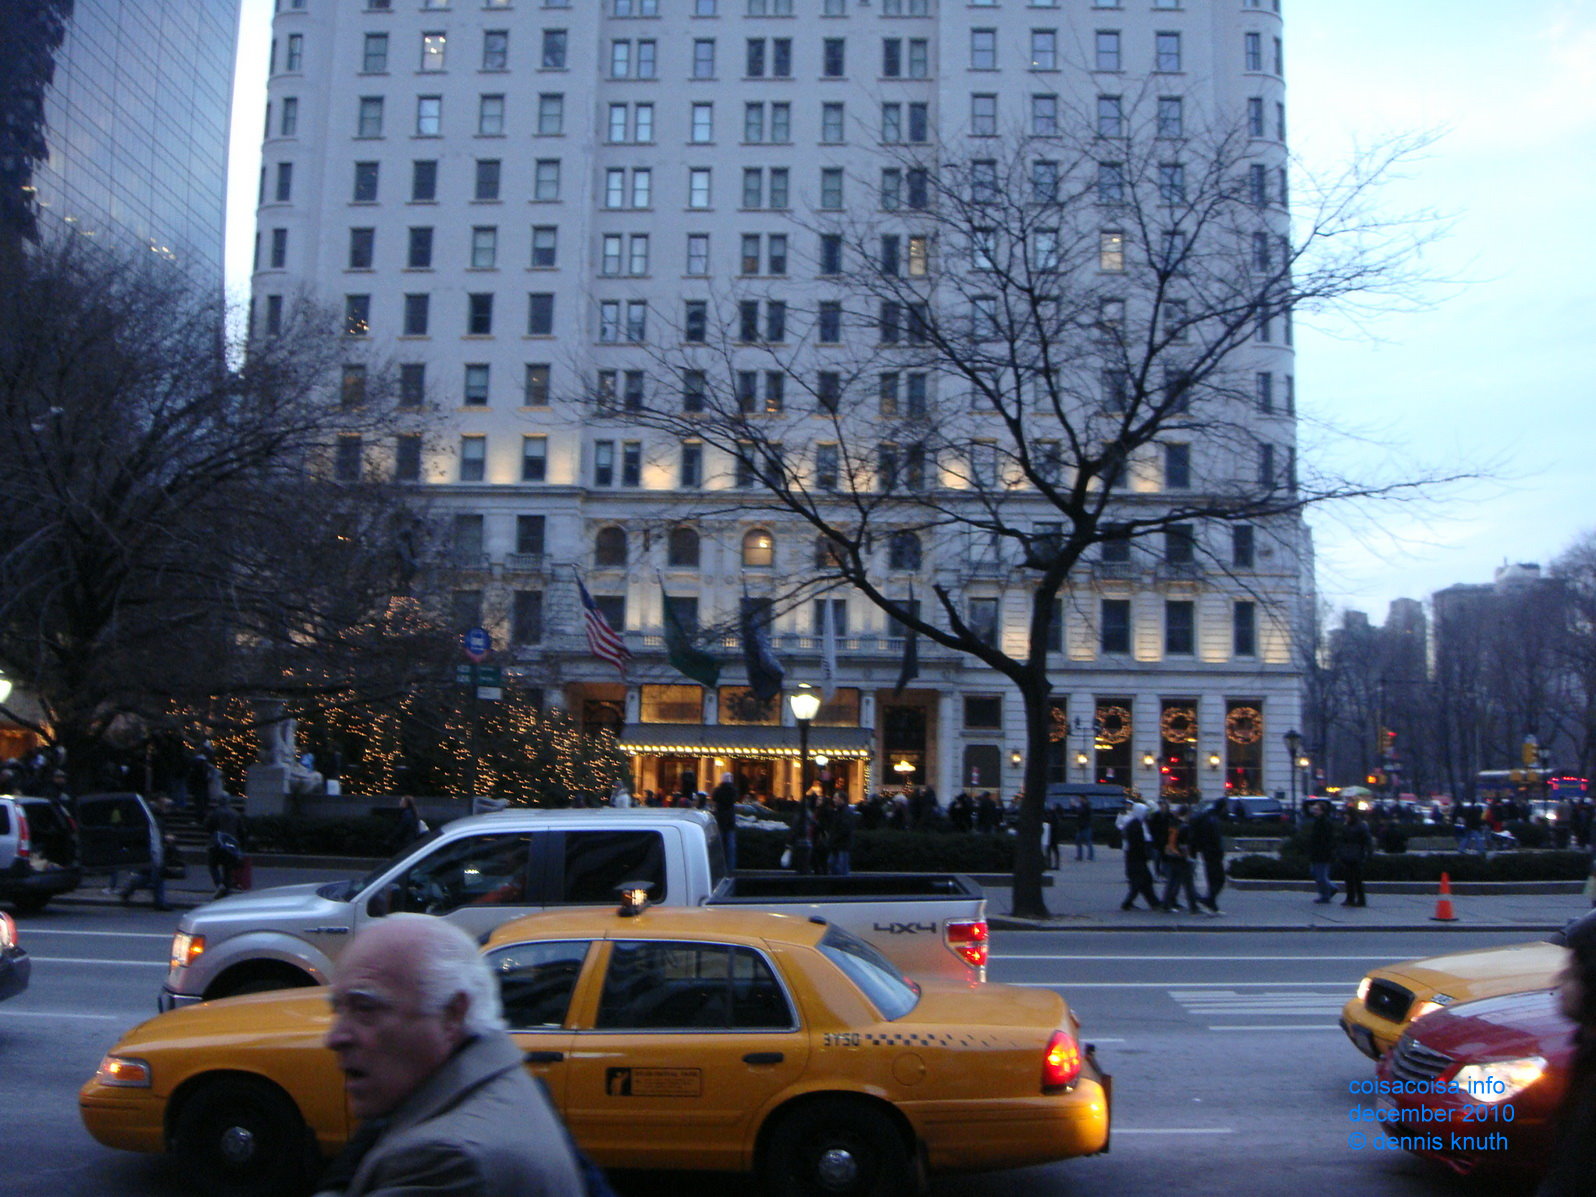 Plaza Hotel and a New York Taxi